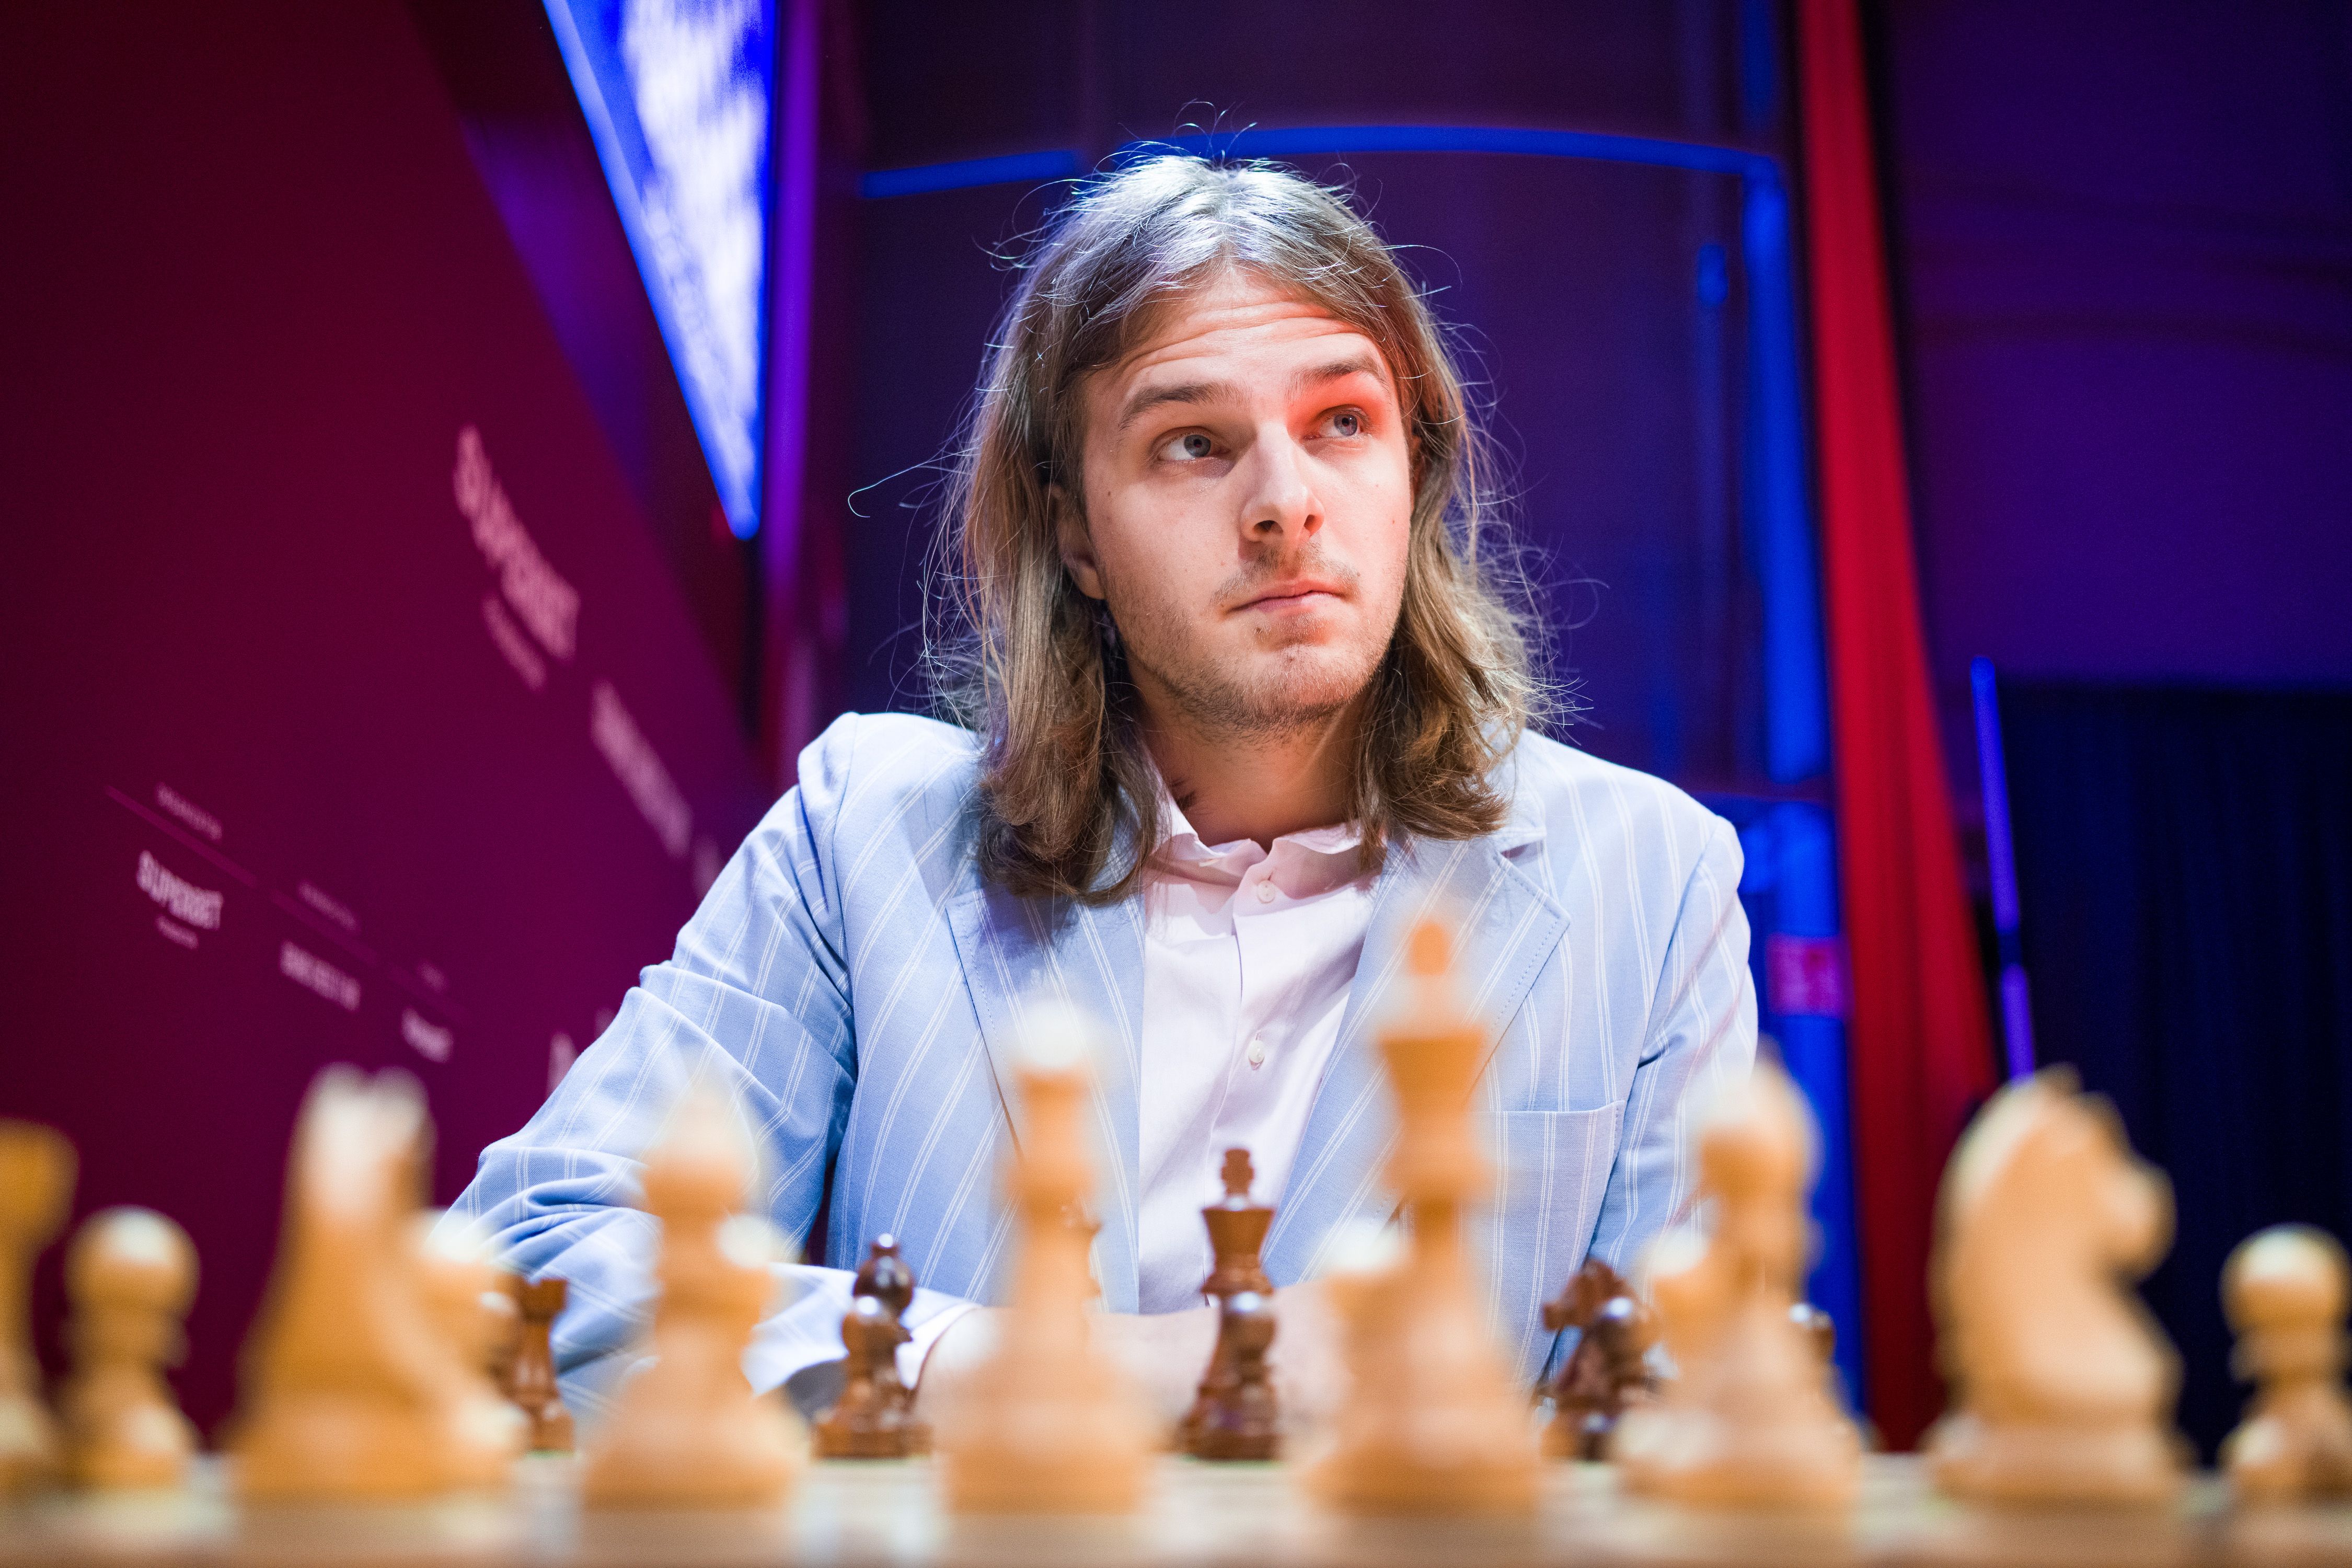 Superbet Rapid 2023 Round 4-6: So and Duda continue to lead Wesley So and  Jan-Krzysztof Duda are the coleaders 9/12 after the sixth round.…